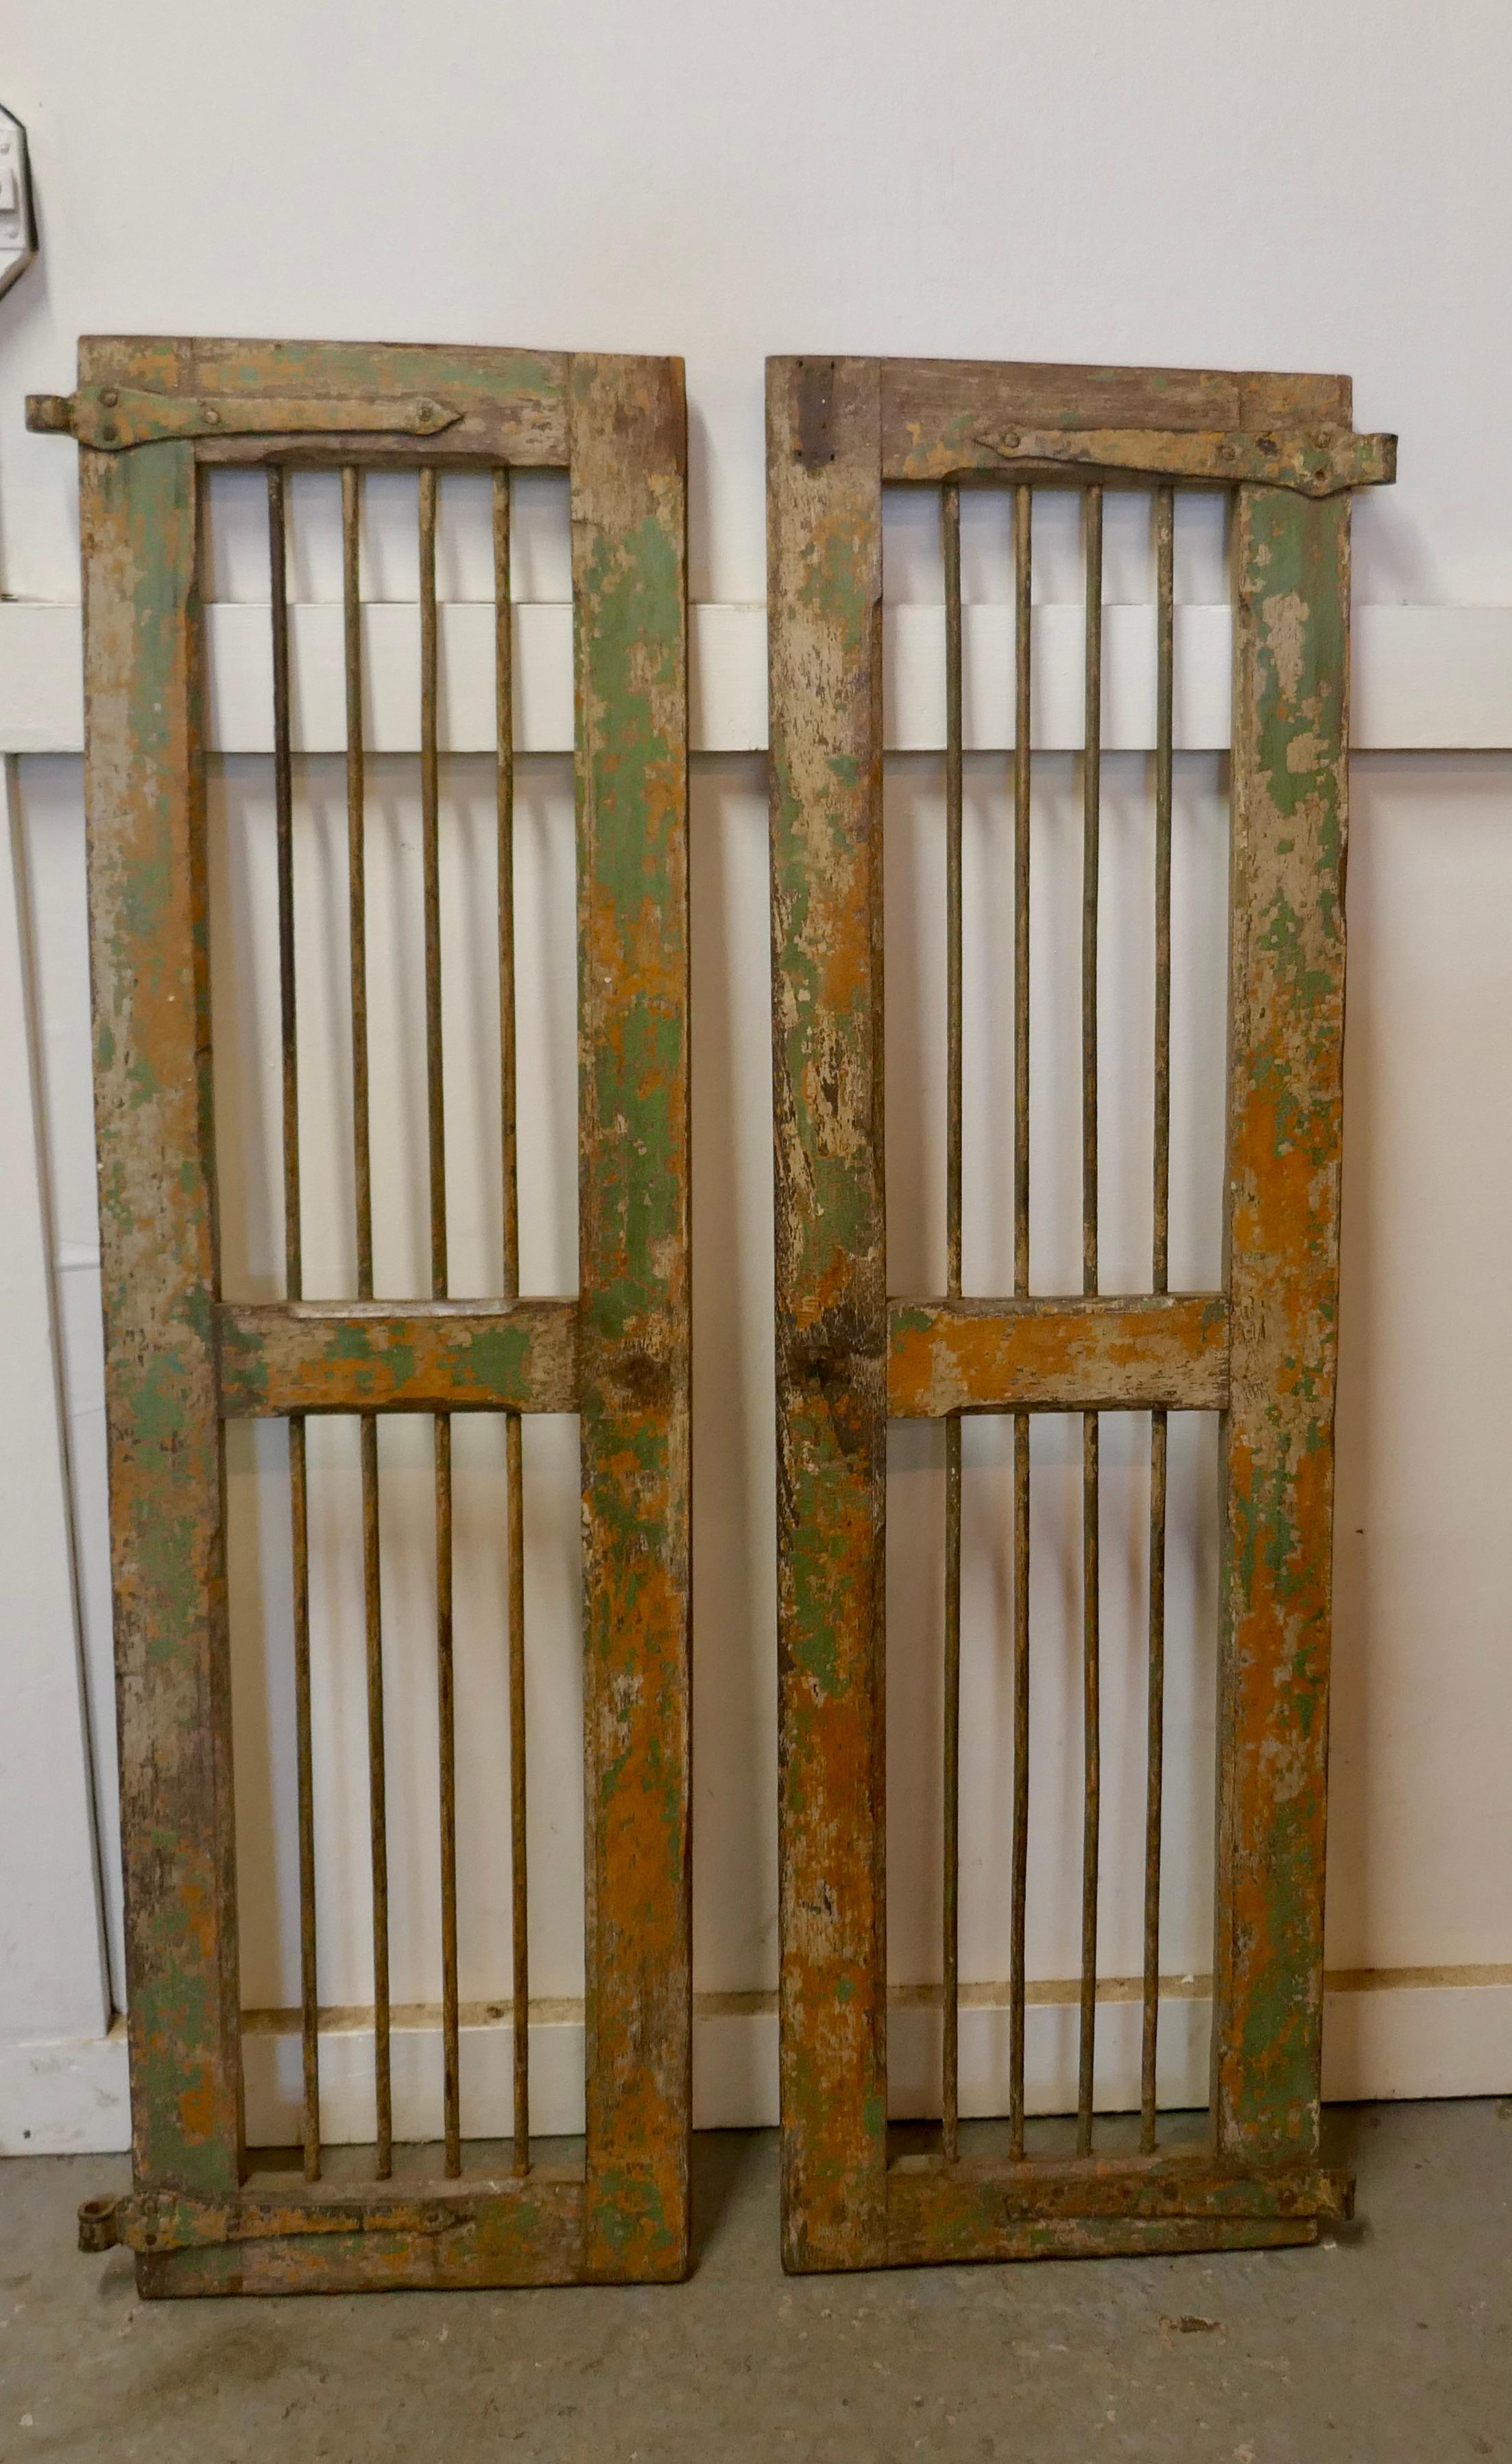 A Pair of North African Wood and Iron Window Shutters

These are decorative fruitwood shutters with Iron Rod insets, they have naturally distressed paint this is worn and shabby showing the original colours of Orange and Green, they are set with